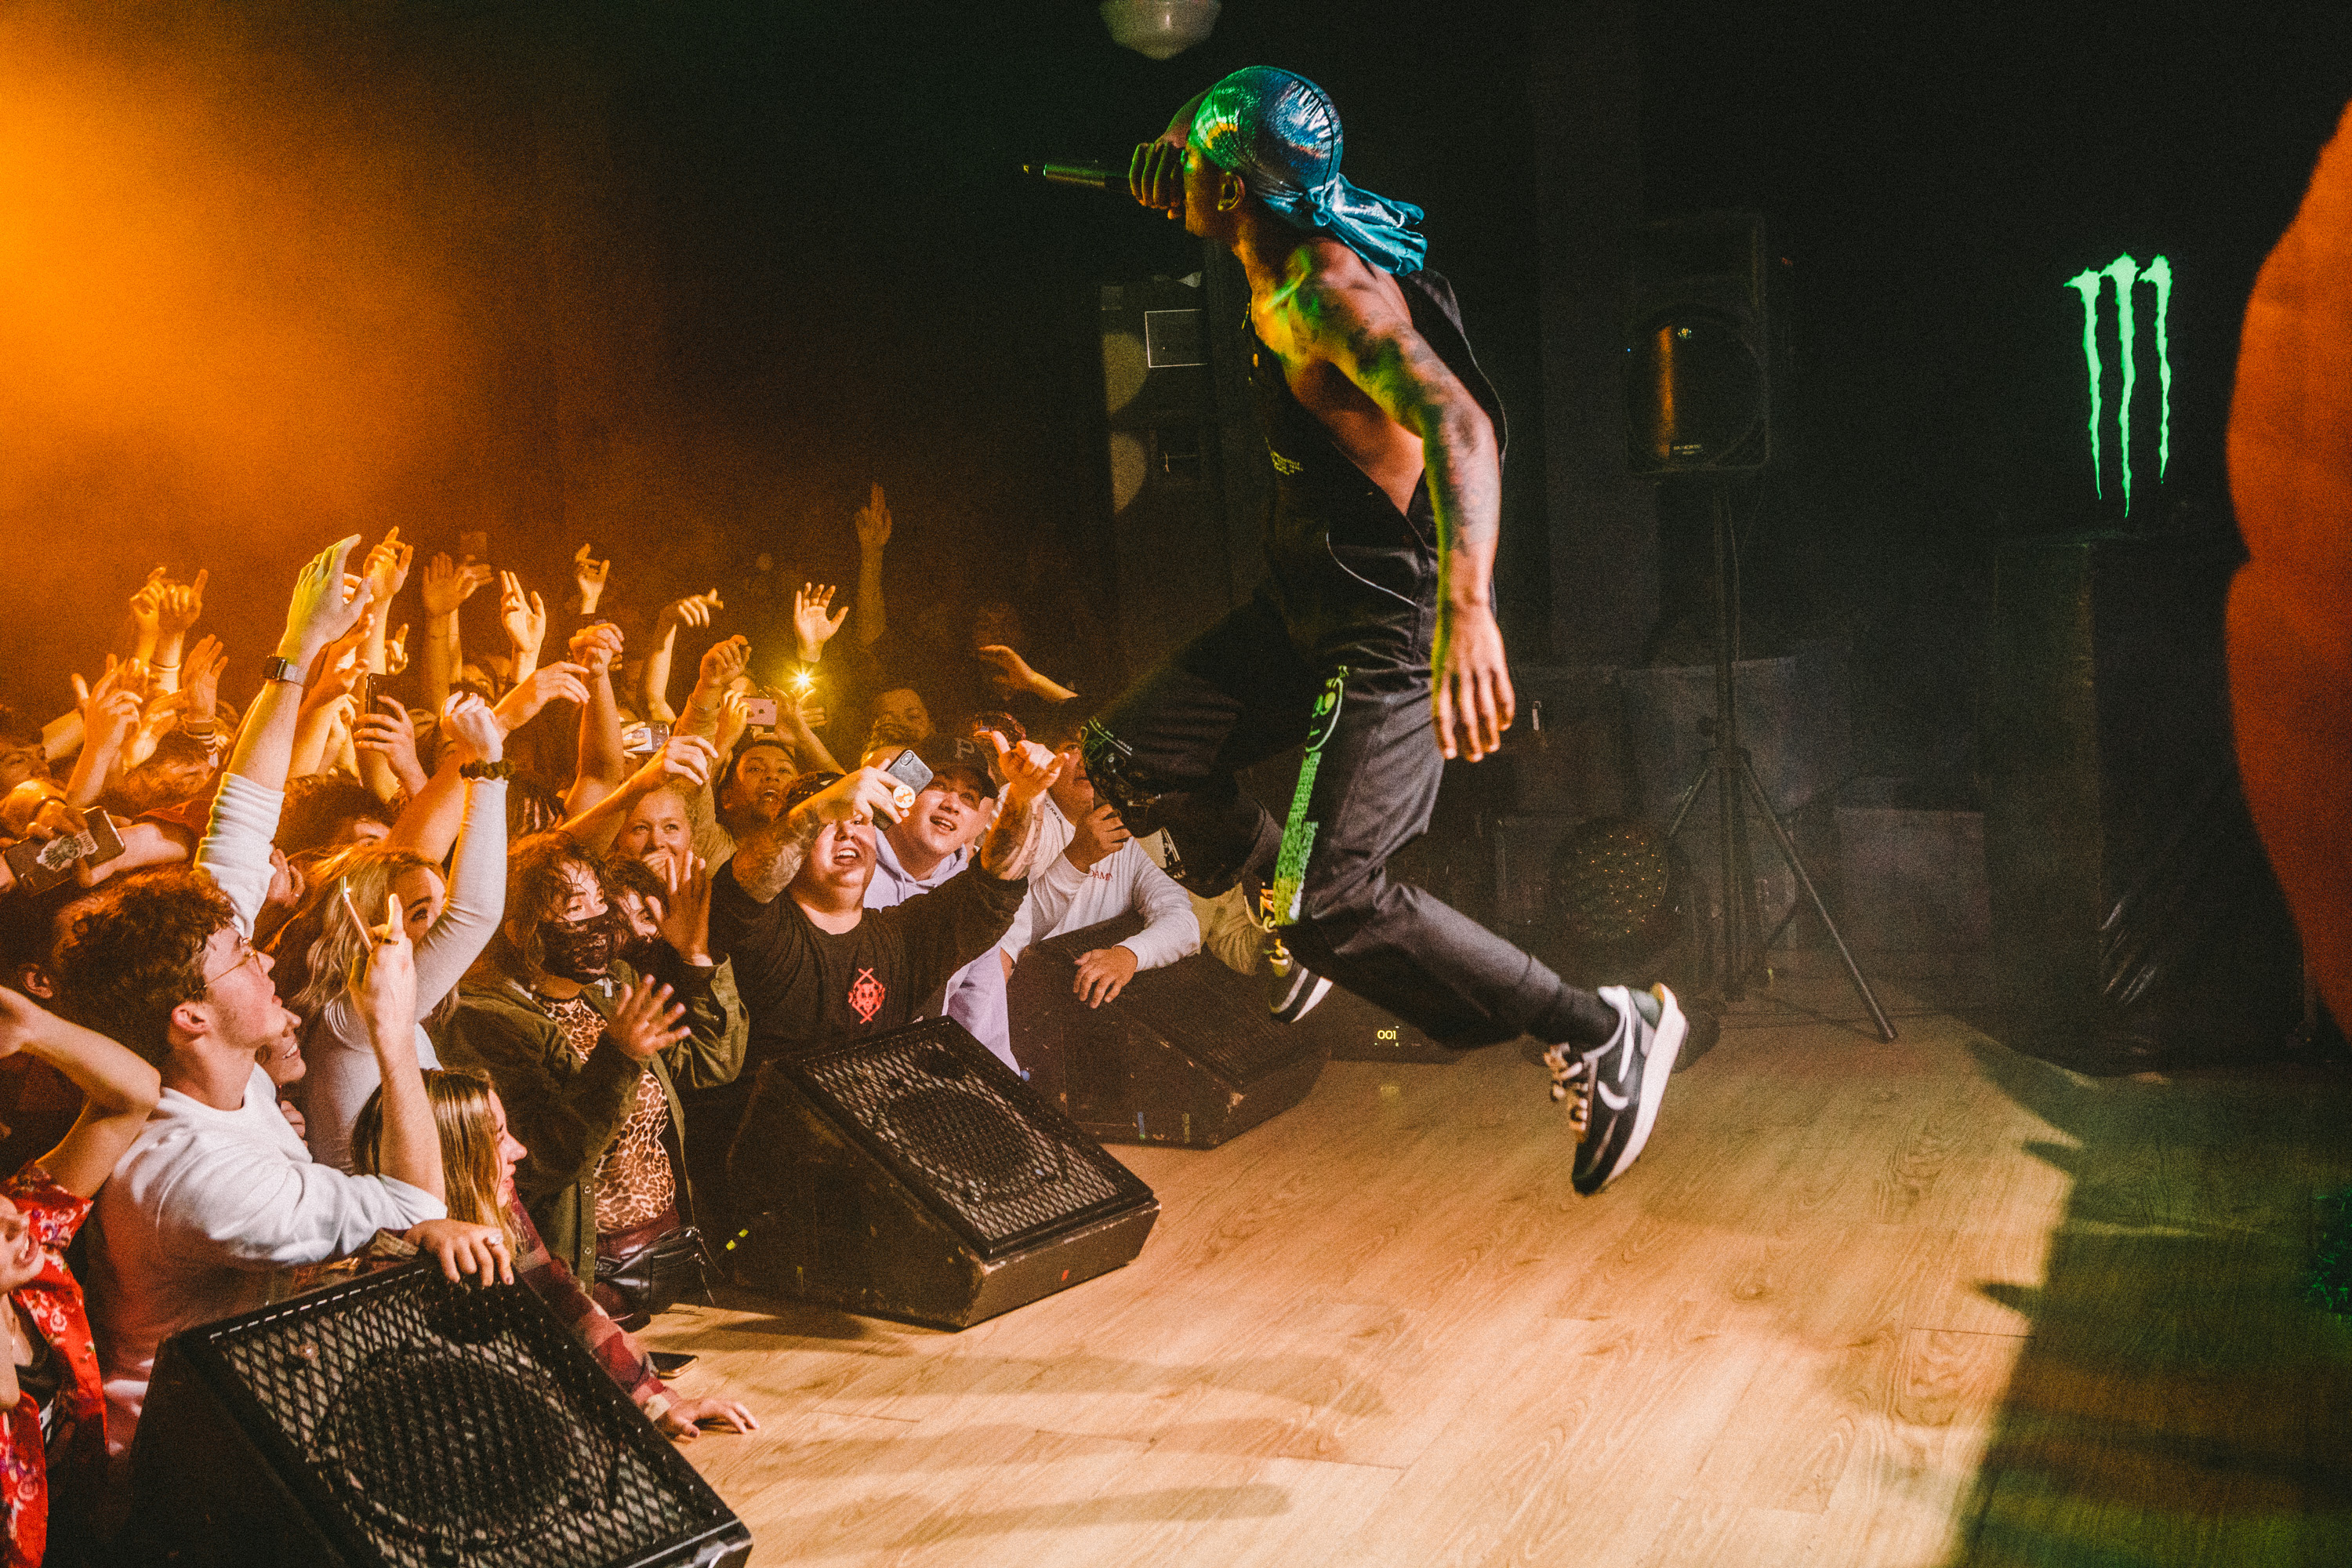 EarthGang Welcome To Mirrorland Tour with Guapdad 4000 (Eugene, Oregon). Photos by Todd Cooper